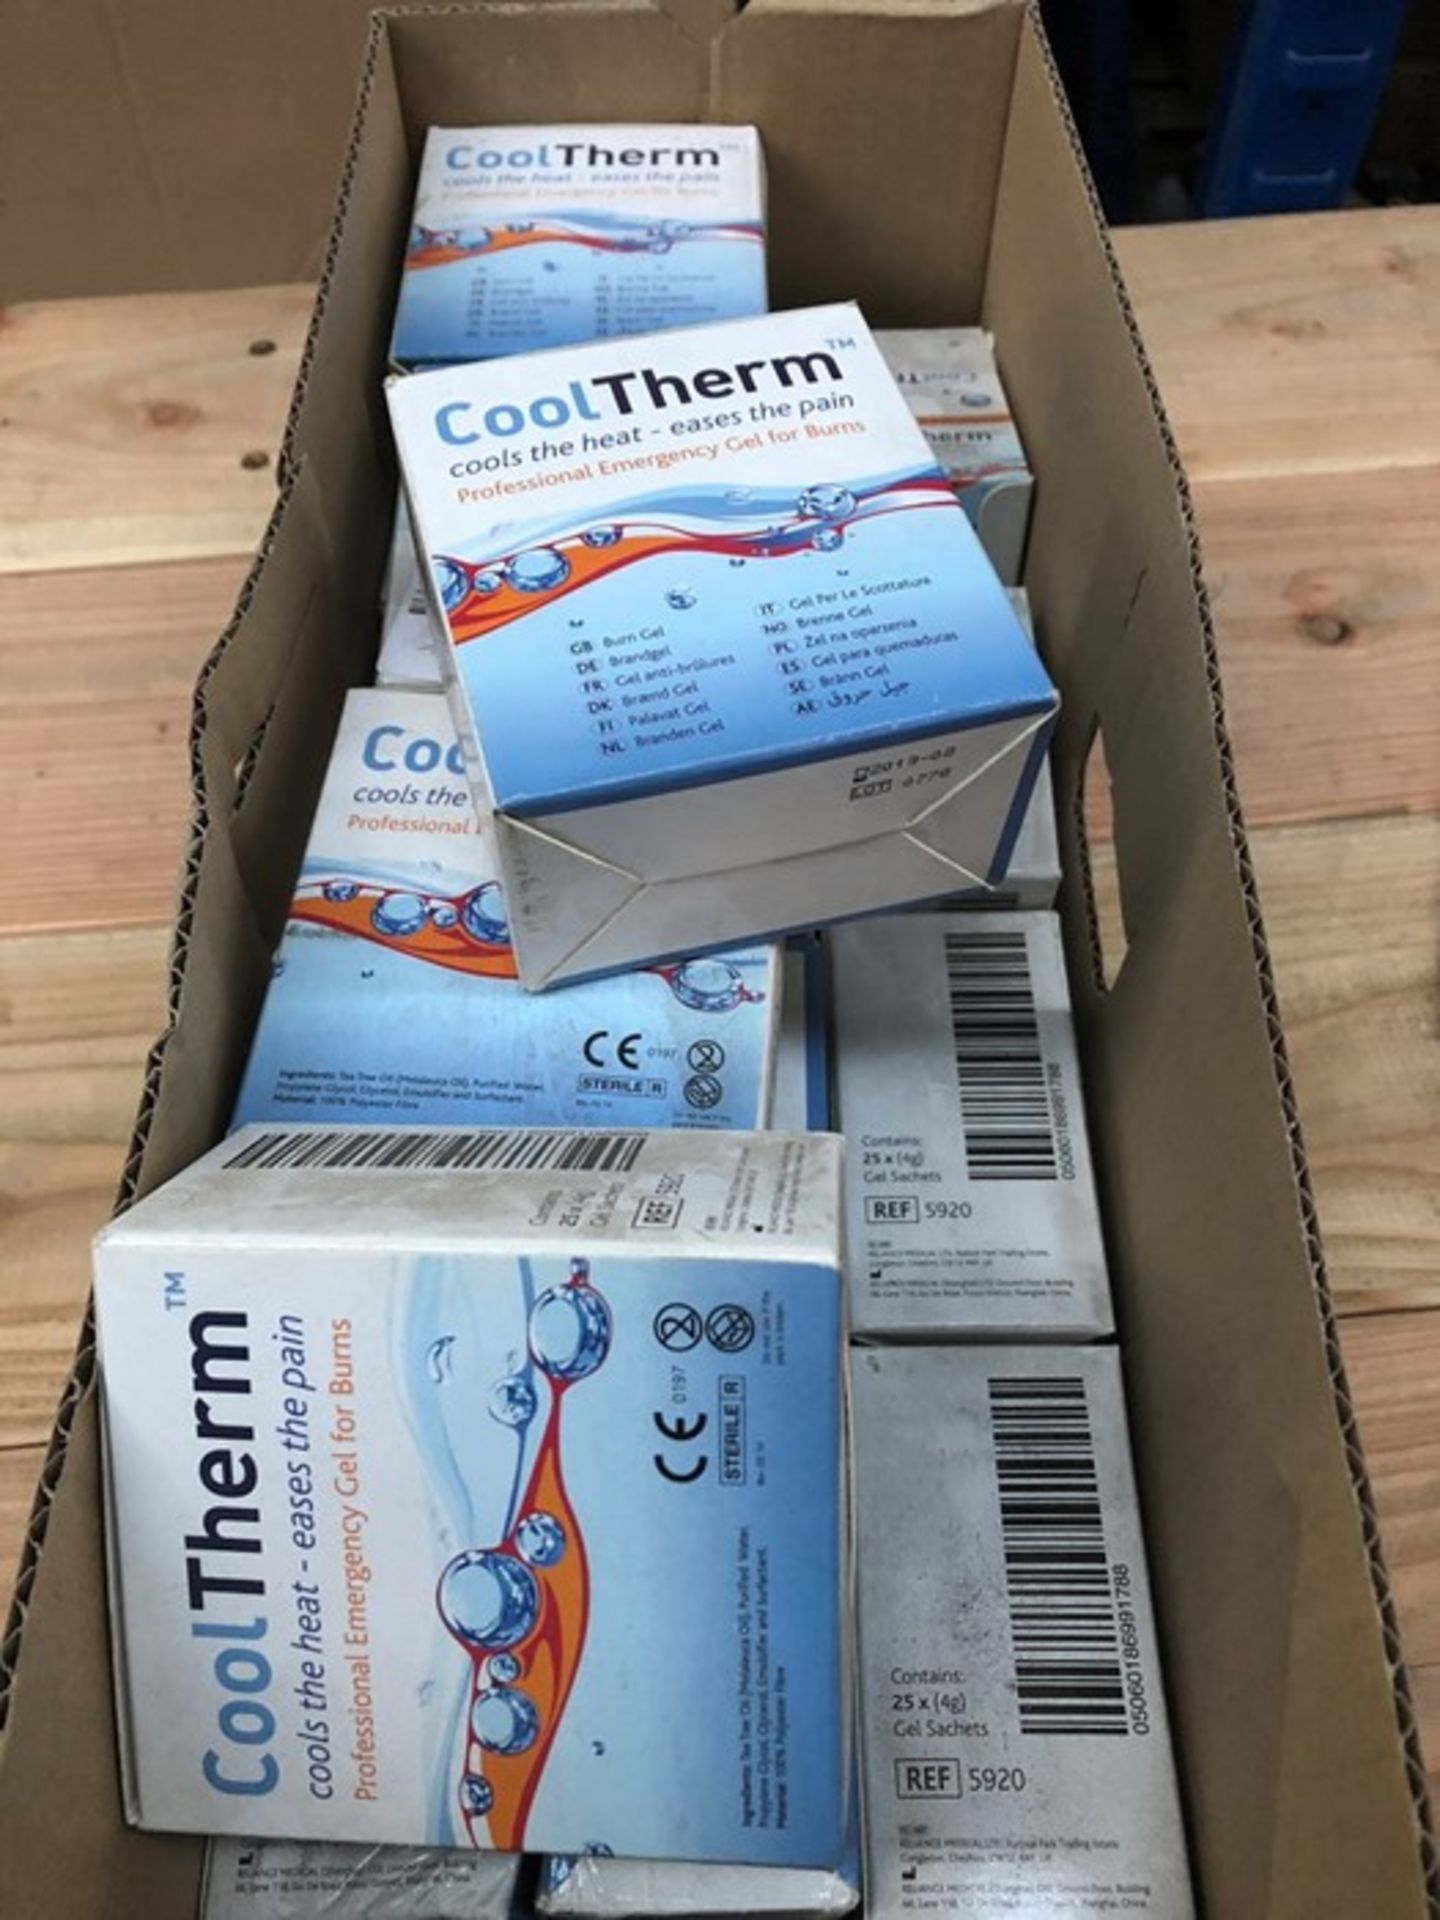 1 LOT TO CONTAIN 1 BOXED FILLED WITH COOLTHERM GEL FOR BURNS / PN - 873 (PUBLIC VIEWING AVAILABLE)